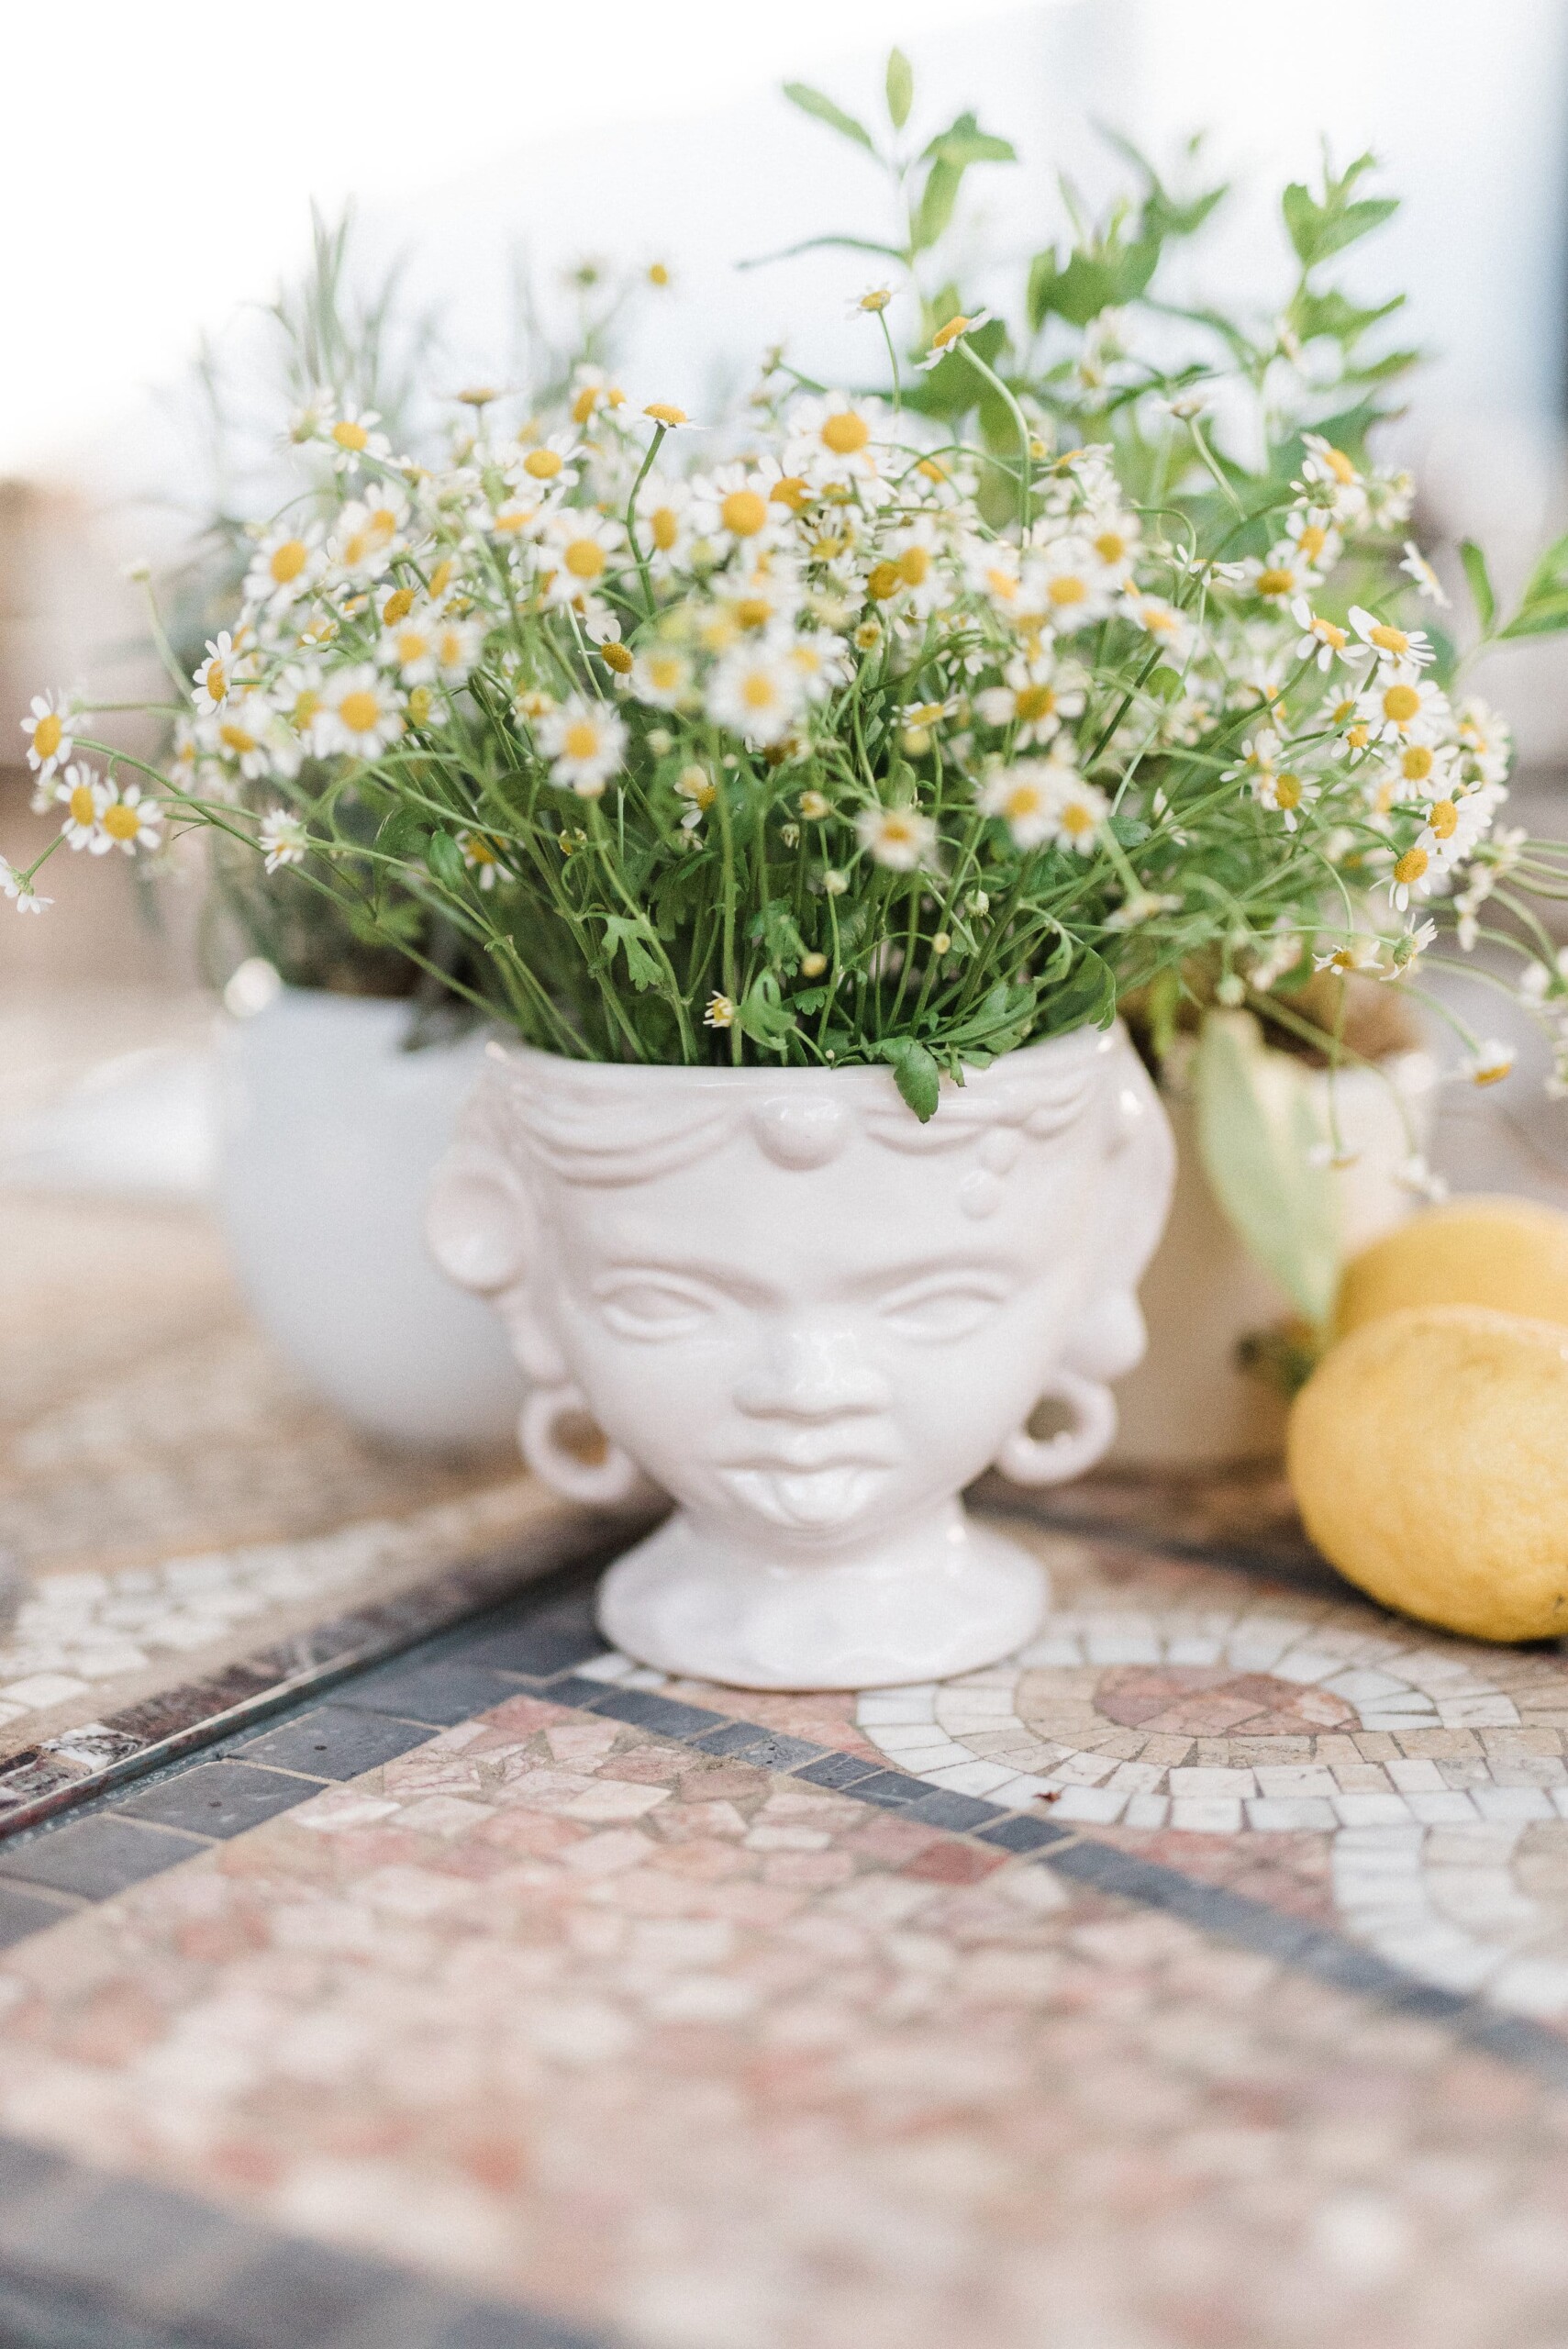 White ceramic vase and daisies as decor for a Wedding in Ravello